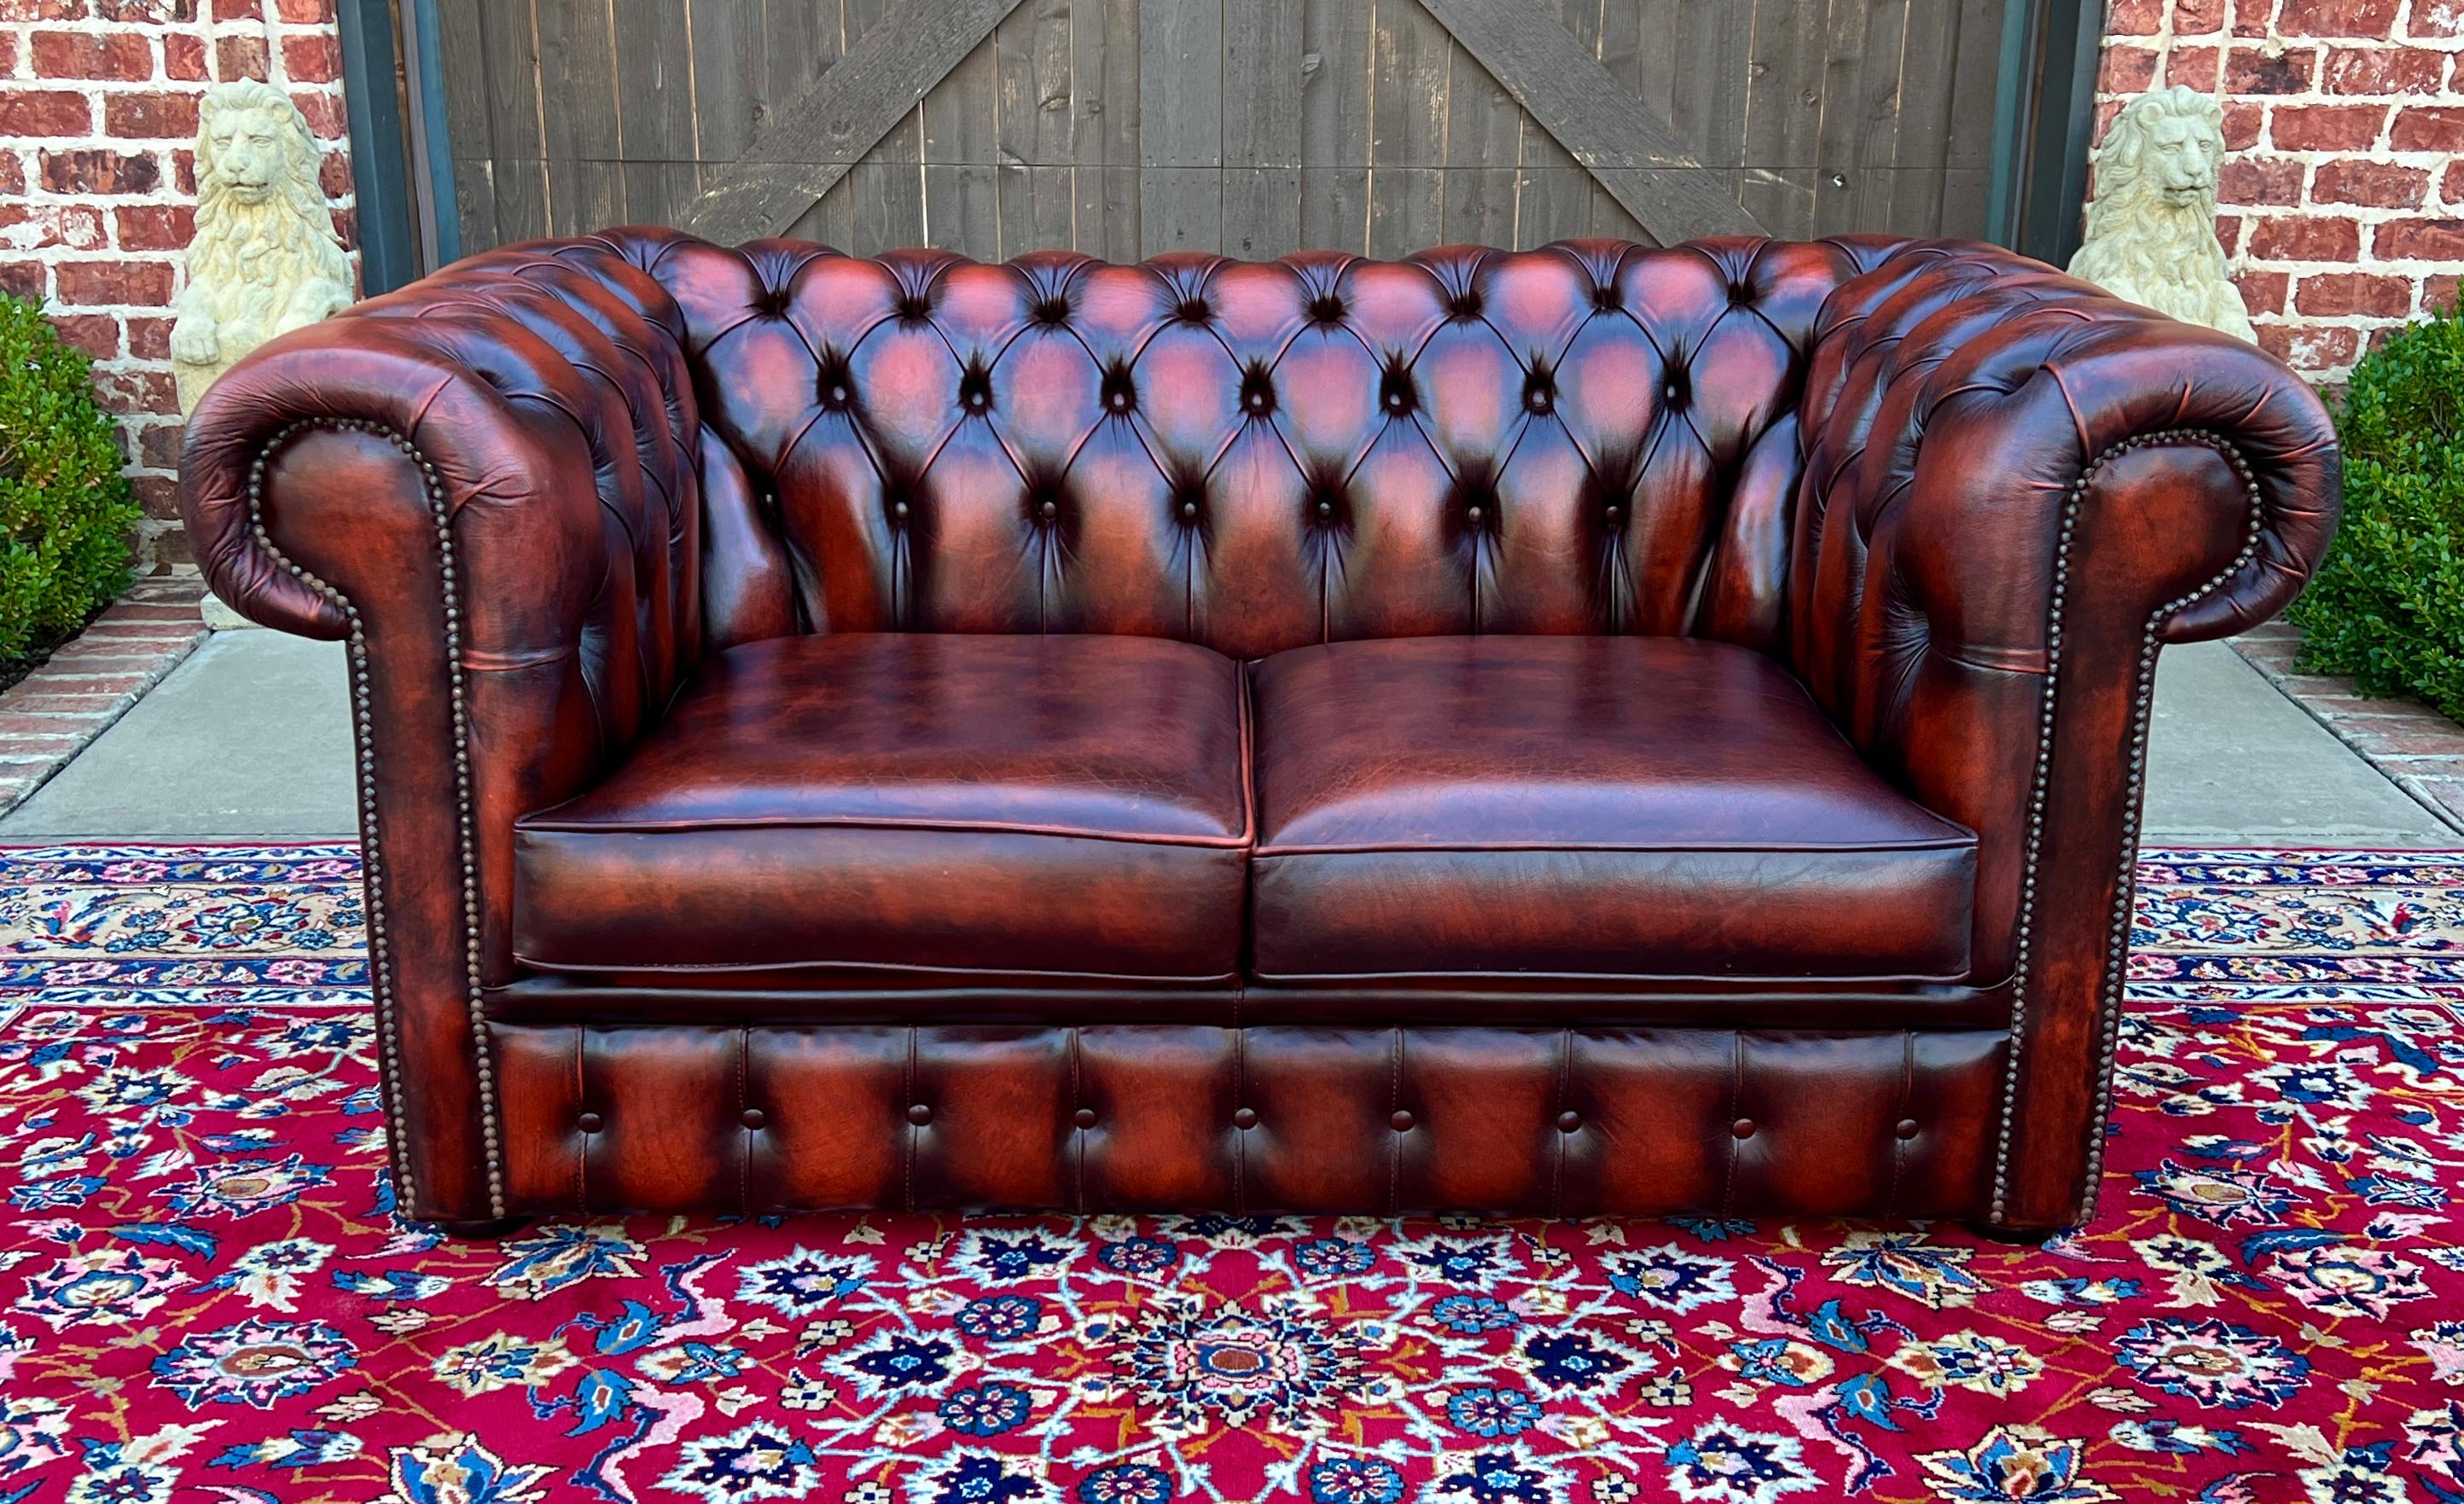 TIMELESS Vintage English Leather Tufted Seat CHESTERFIELD 2-Seat Sofa/Love Seat Oxblood Red

PERFECT ICONIC look for a gentleman's office, study, library, or cigar lounge~~fully button tufted upholstery is oxblood red in color~~timeless traditional